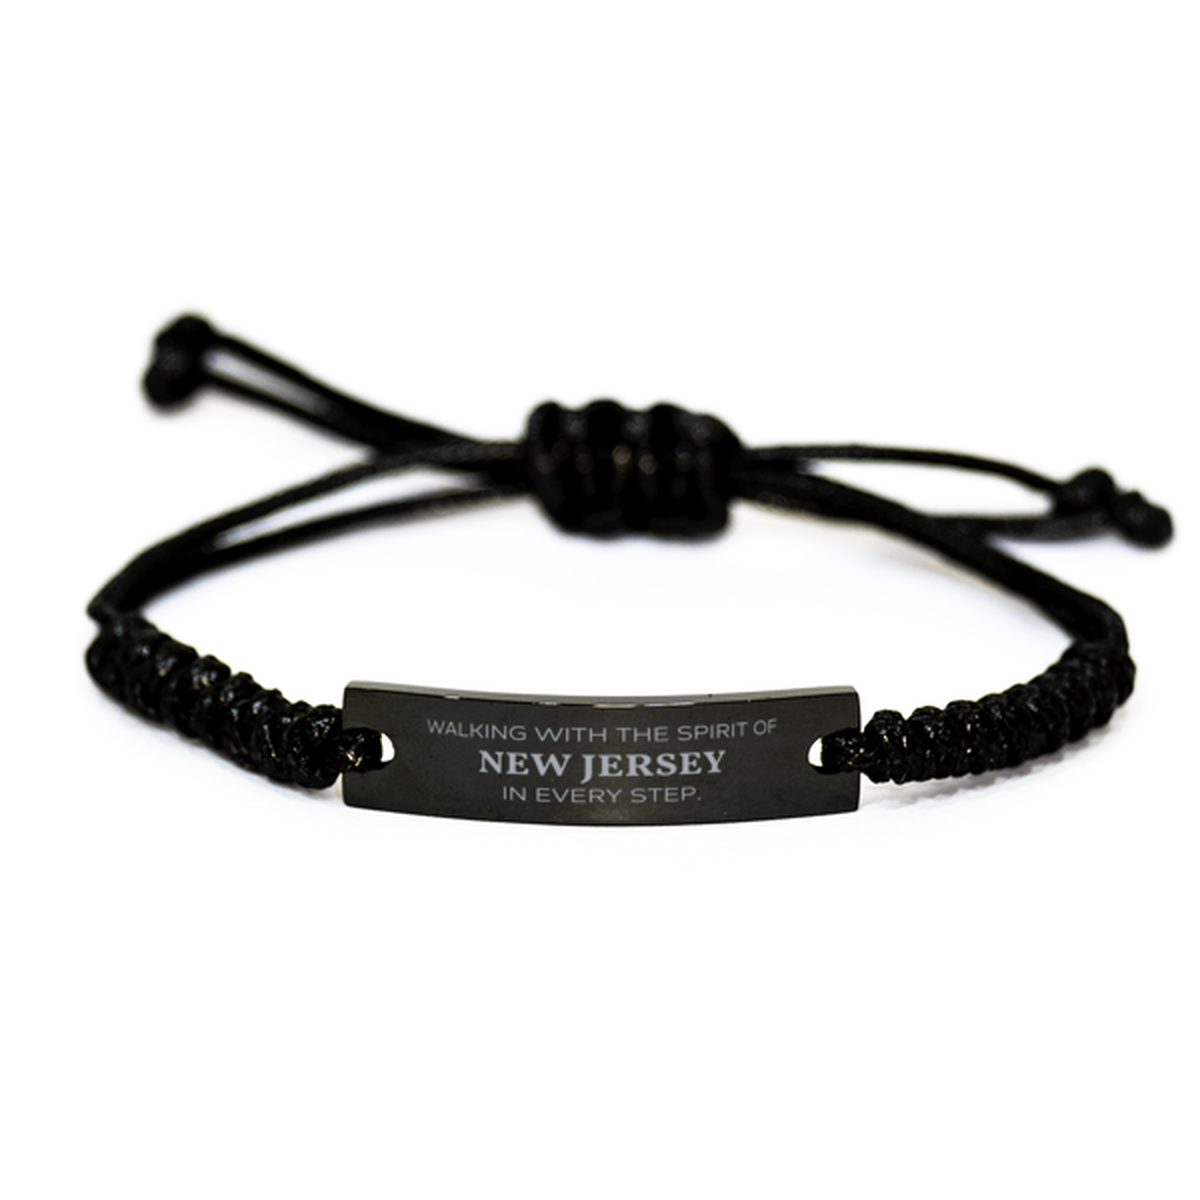 New Jersey Gifts, Walking with the spirit, Love New Jersey Birthday Christmas Black Rope Bracelet For New Jersey People, Men, Women, Friends